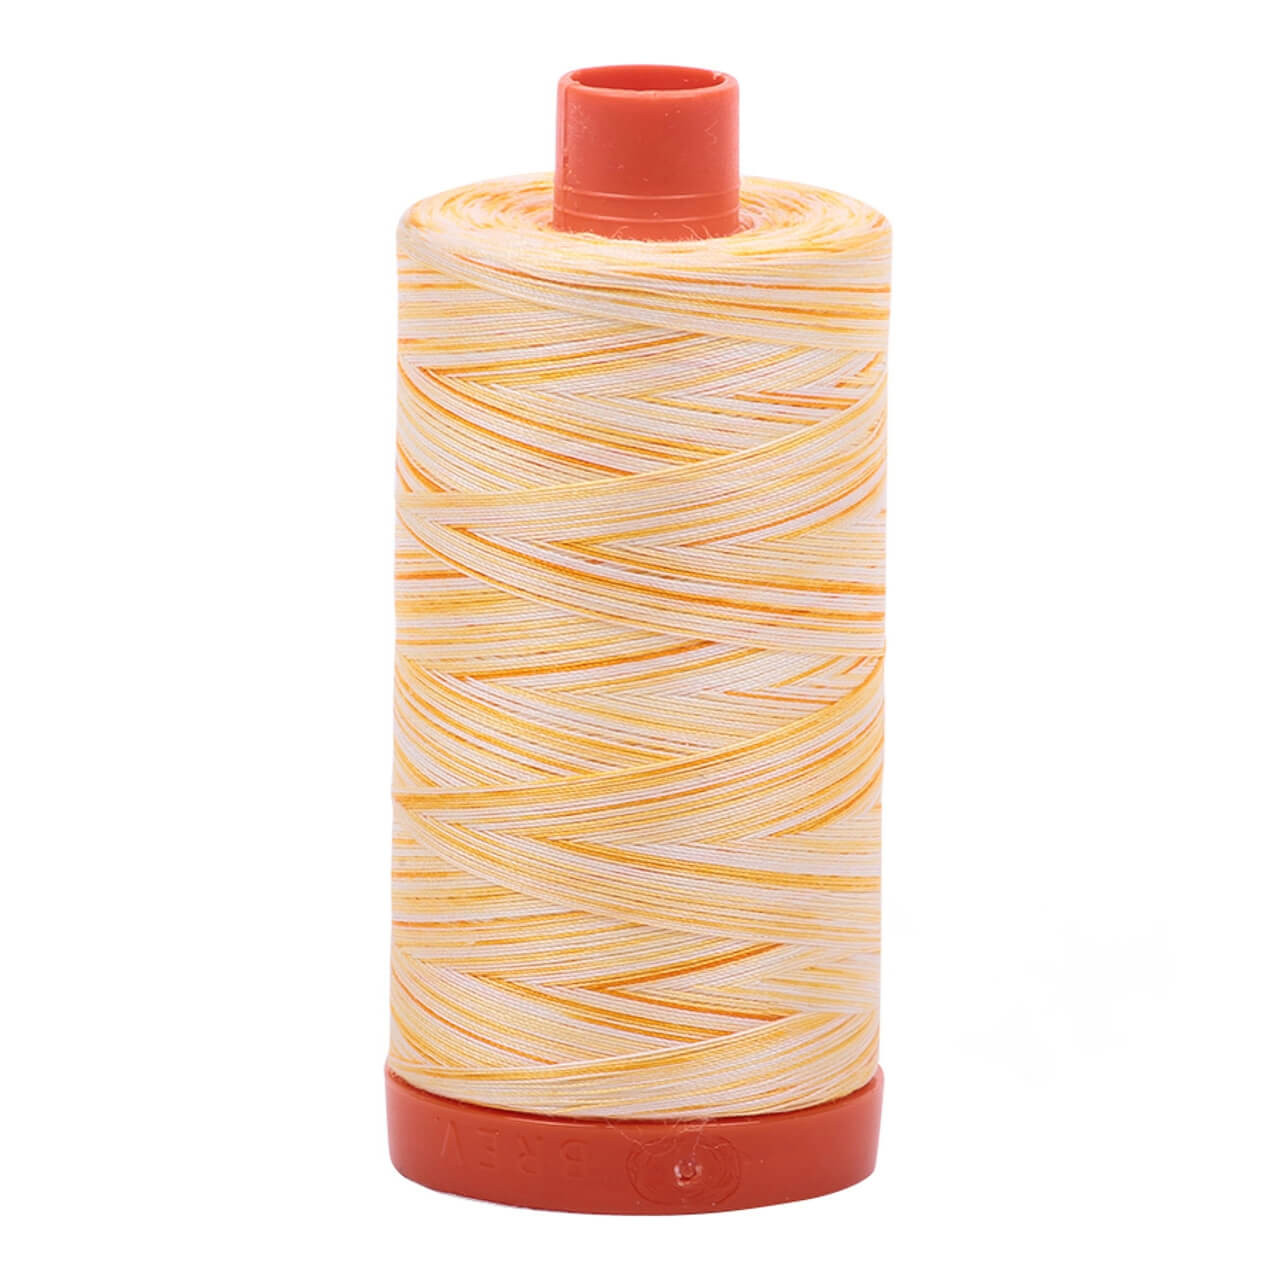 Large spool of Aurifil Limoni 50wt Egyptian cotton thread in variegated yellow